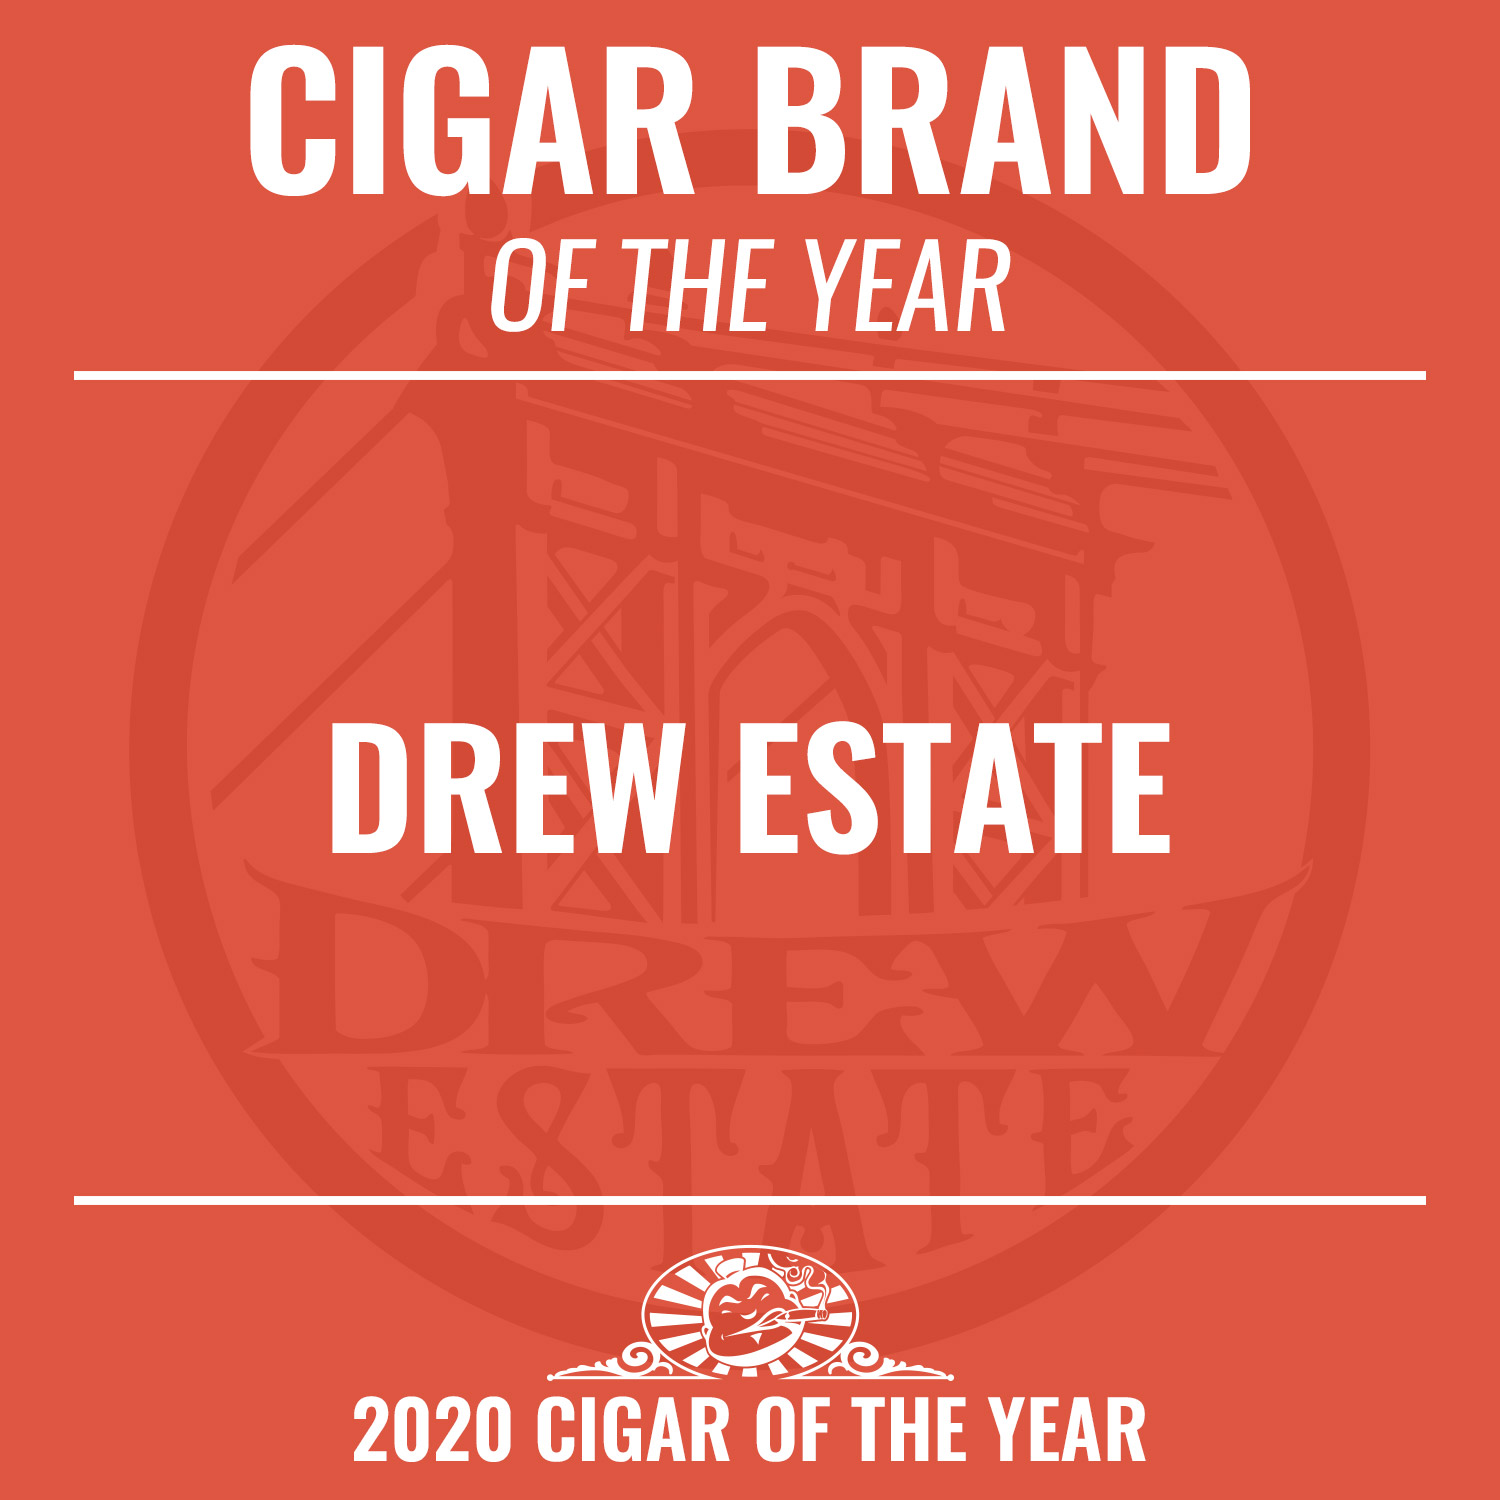 Drew Estate Brand of the Year 2020